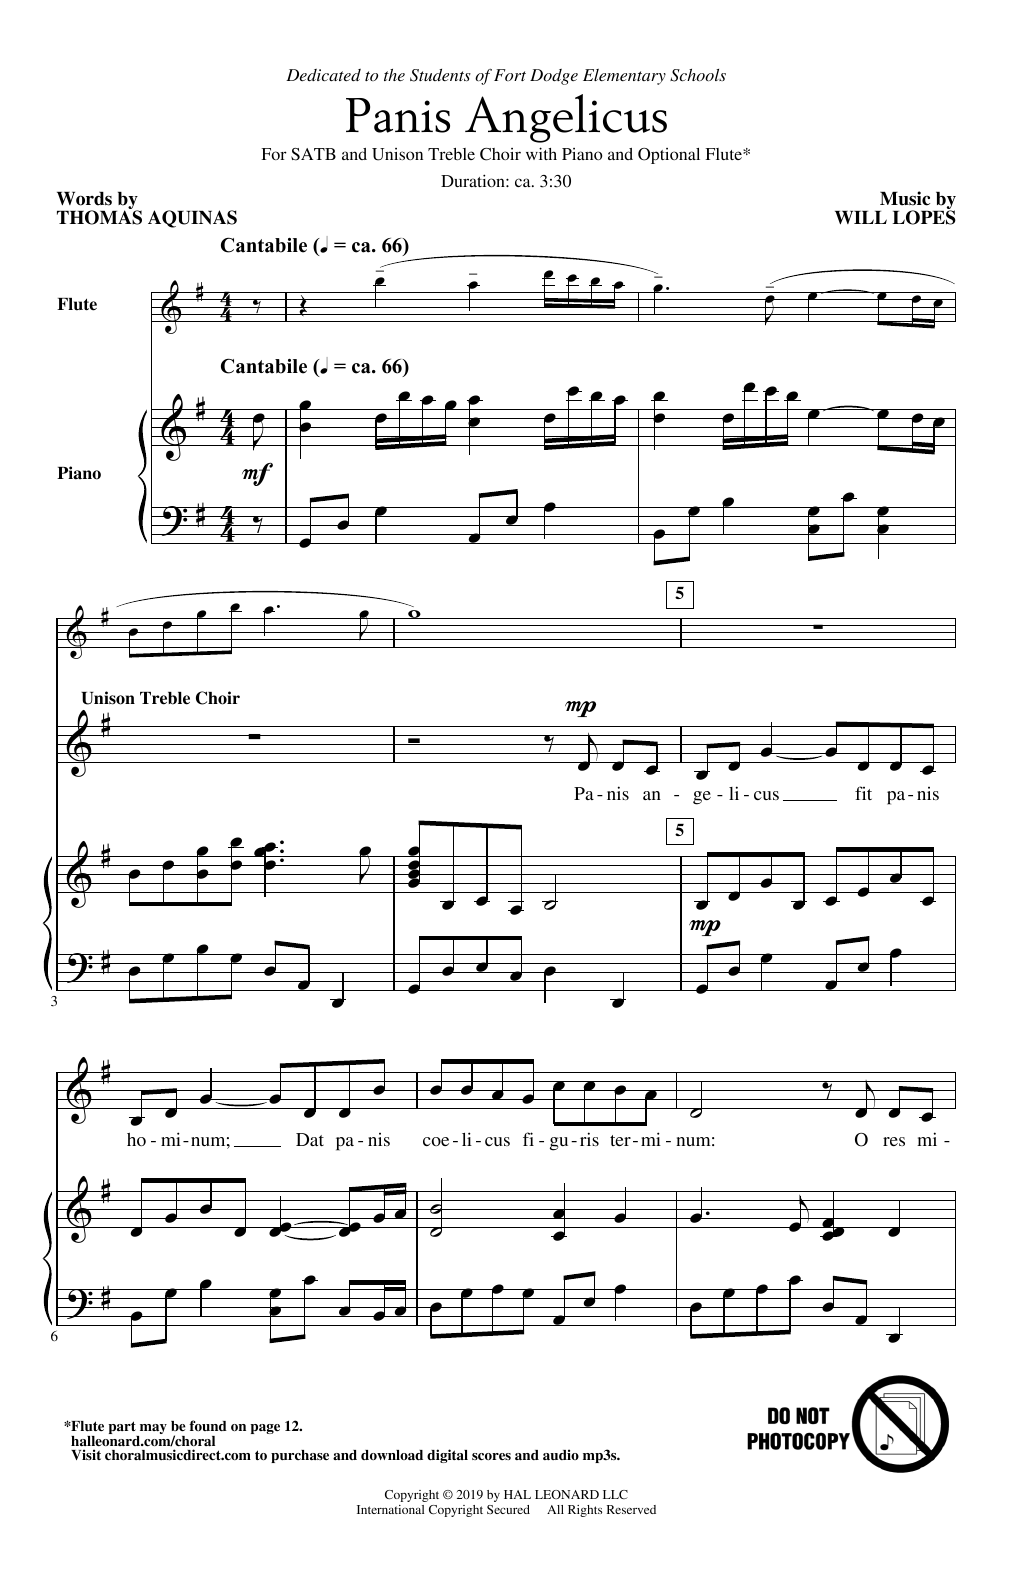 Thomas Aquinas and Will Lopes Panis Angelicus sheet music notes and chords arranged for SATB Choir